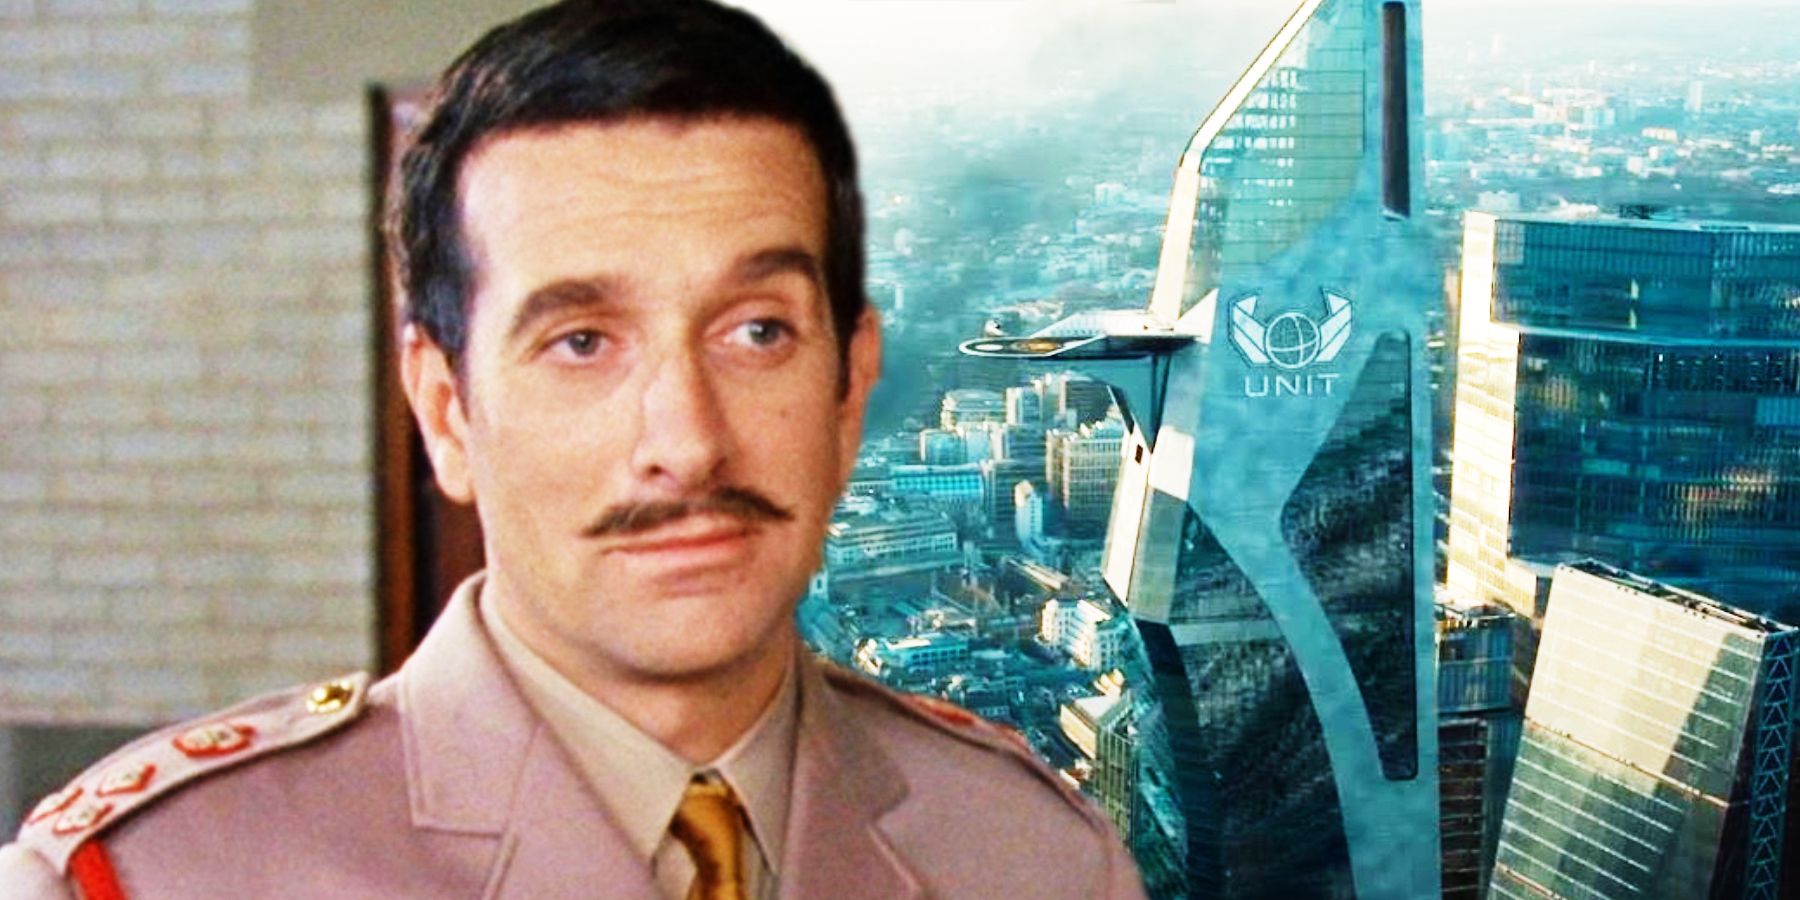 A military man with a moustache stands next to an impressive skyscraper